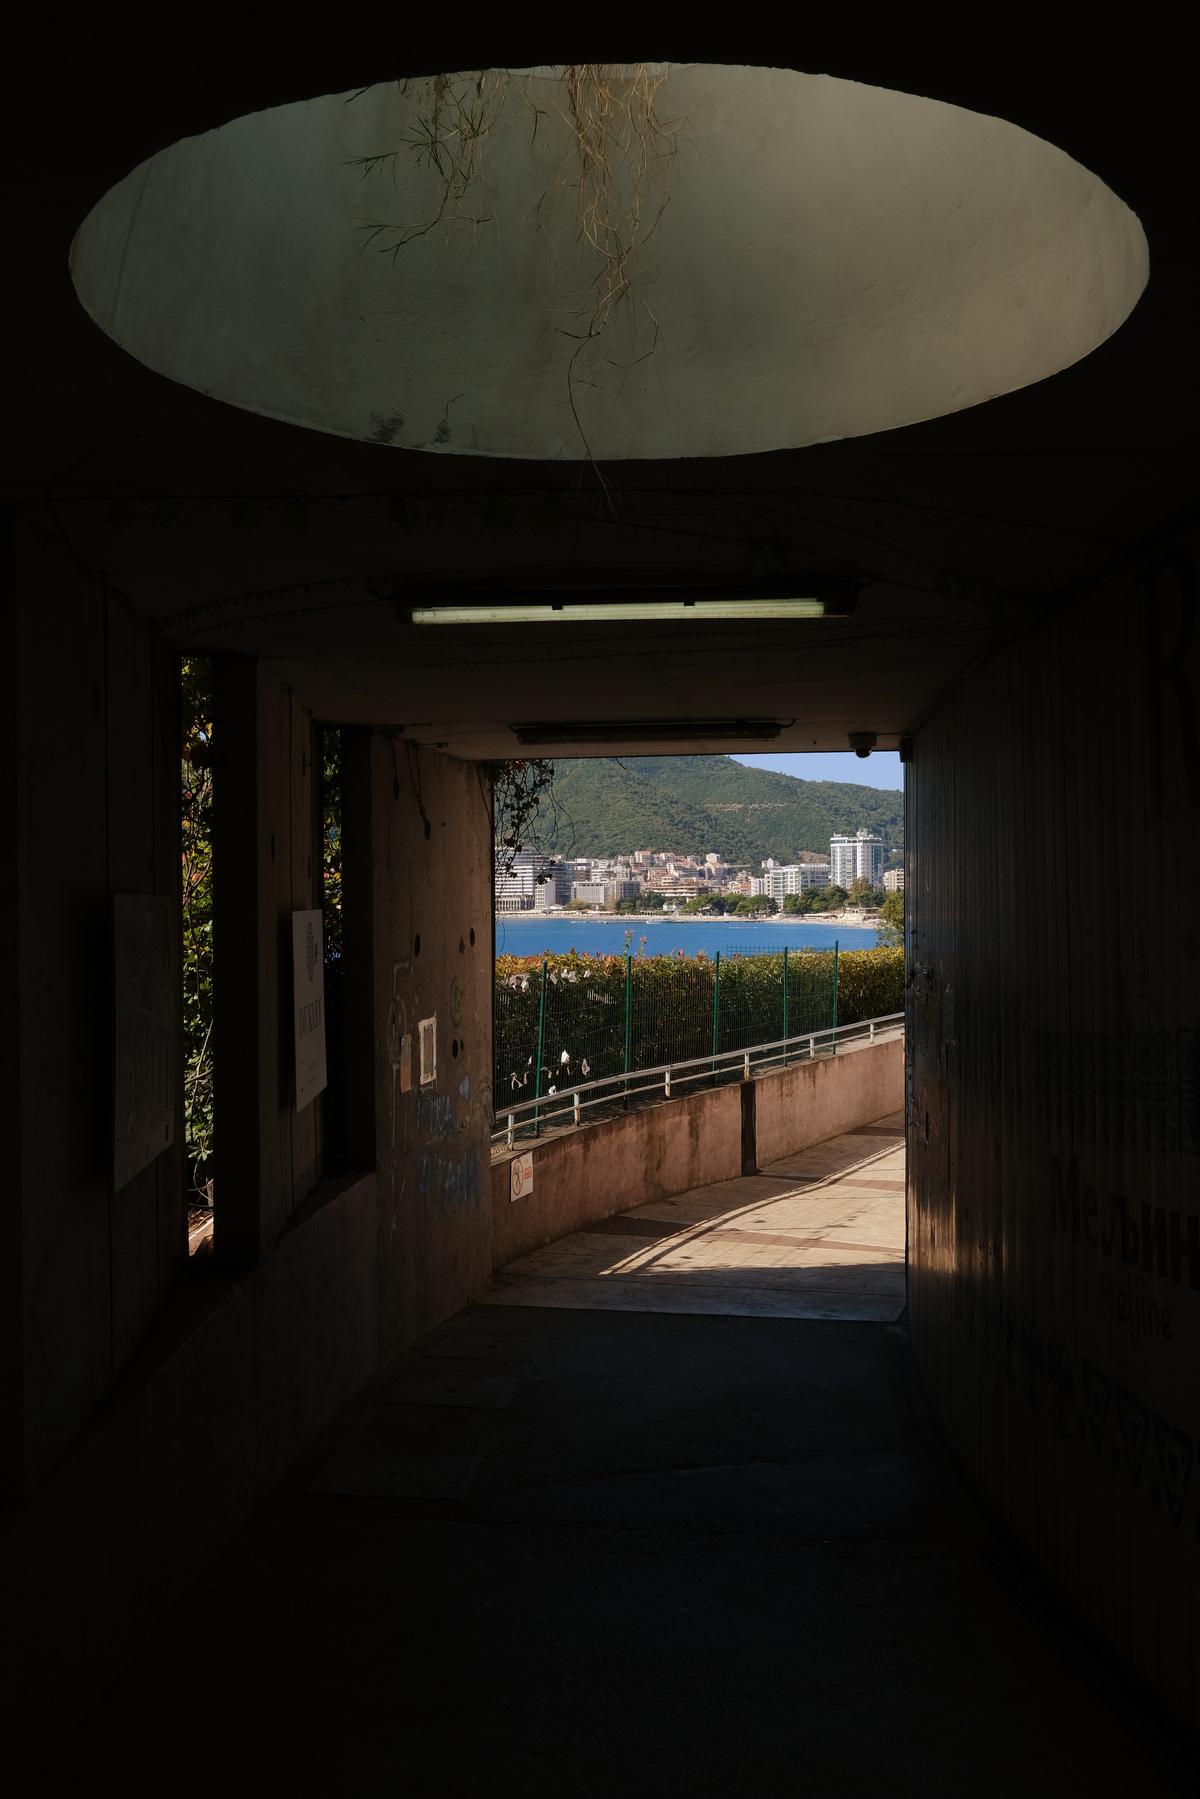 A pedestrian tunnel along the coast, dimly lit by a skylight with hanging vegetation, between Sveti Stefan and Budva, Montenegro.